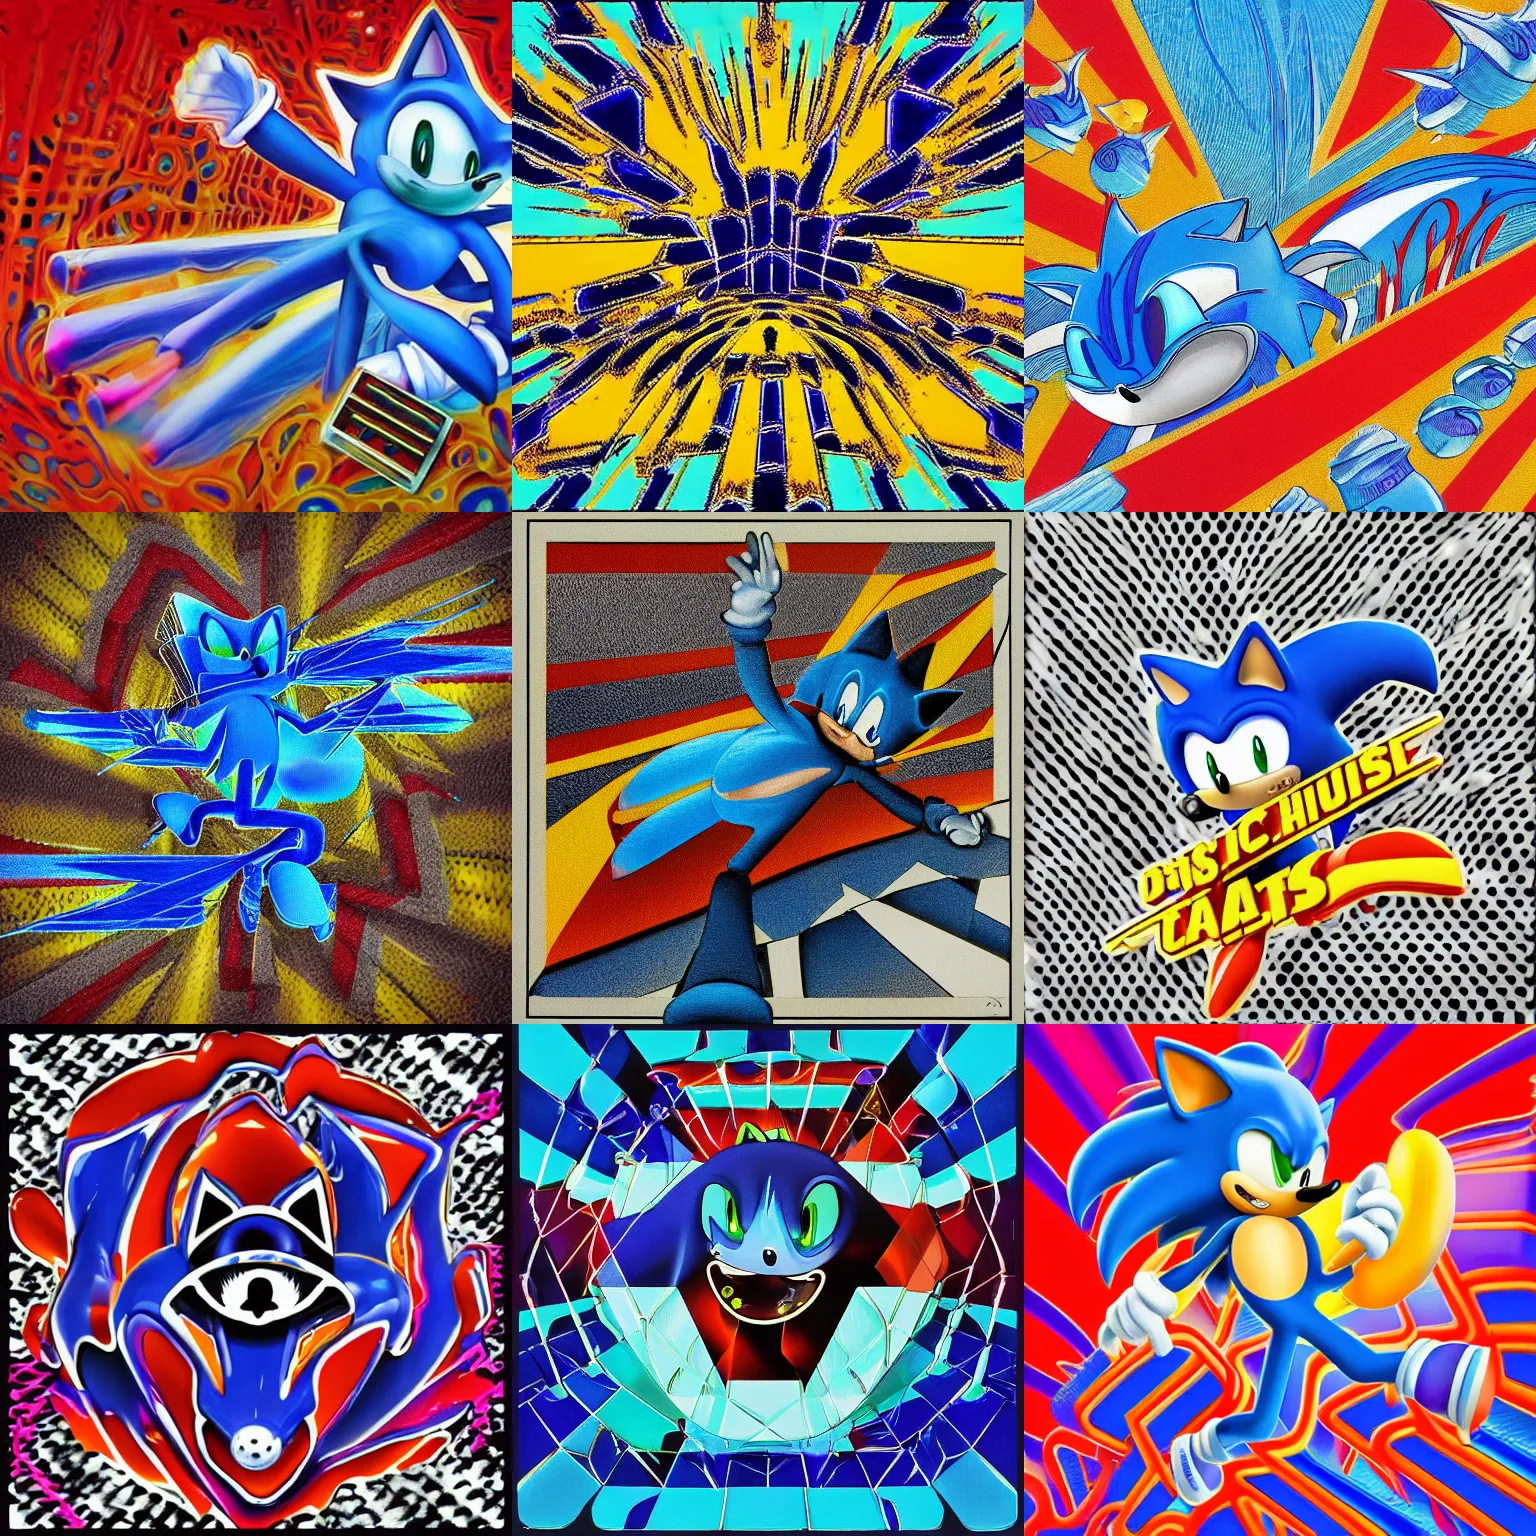 Prompt: surreal, sonic, faded, totally radical detailed professional, high quality memphis group airbrush art MGMT album cover of a liquid dissolving LSD DMT blue sonic the hedgehog on a flat checkerboard plane, 1980s 1988 prerendered graphics raytraced phong shaded album cover